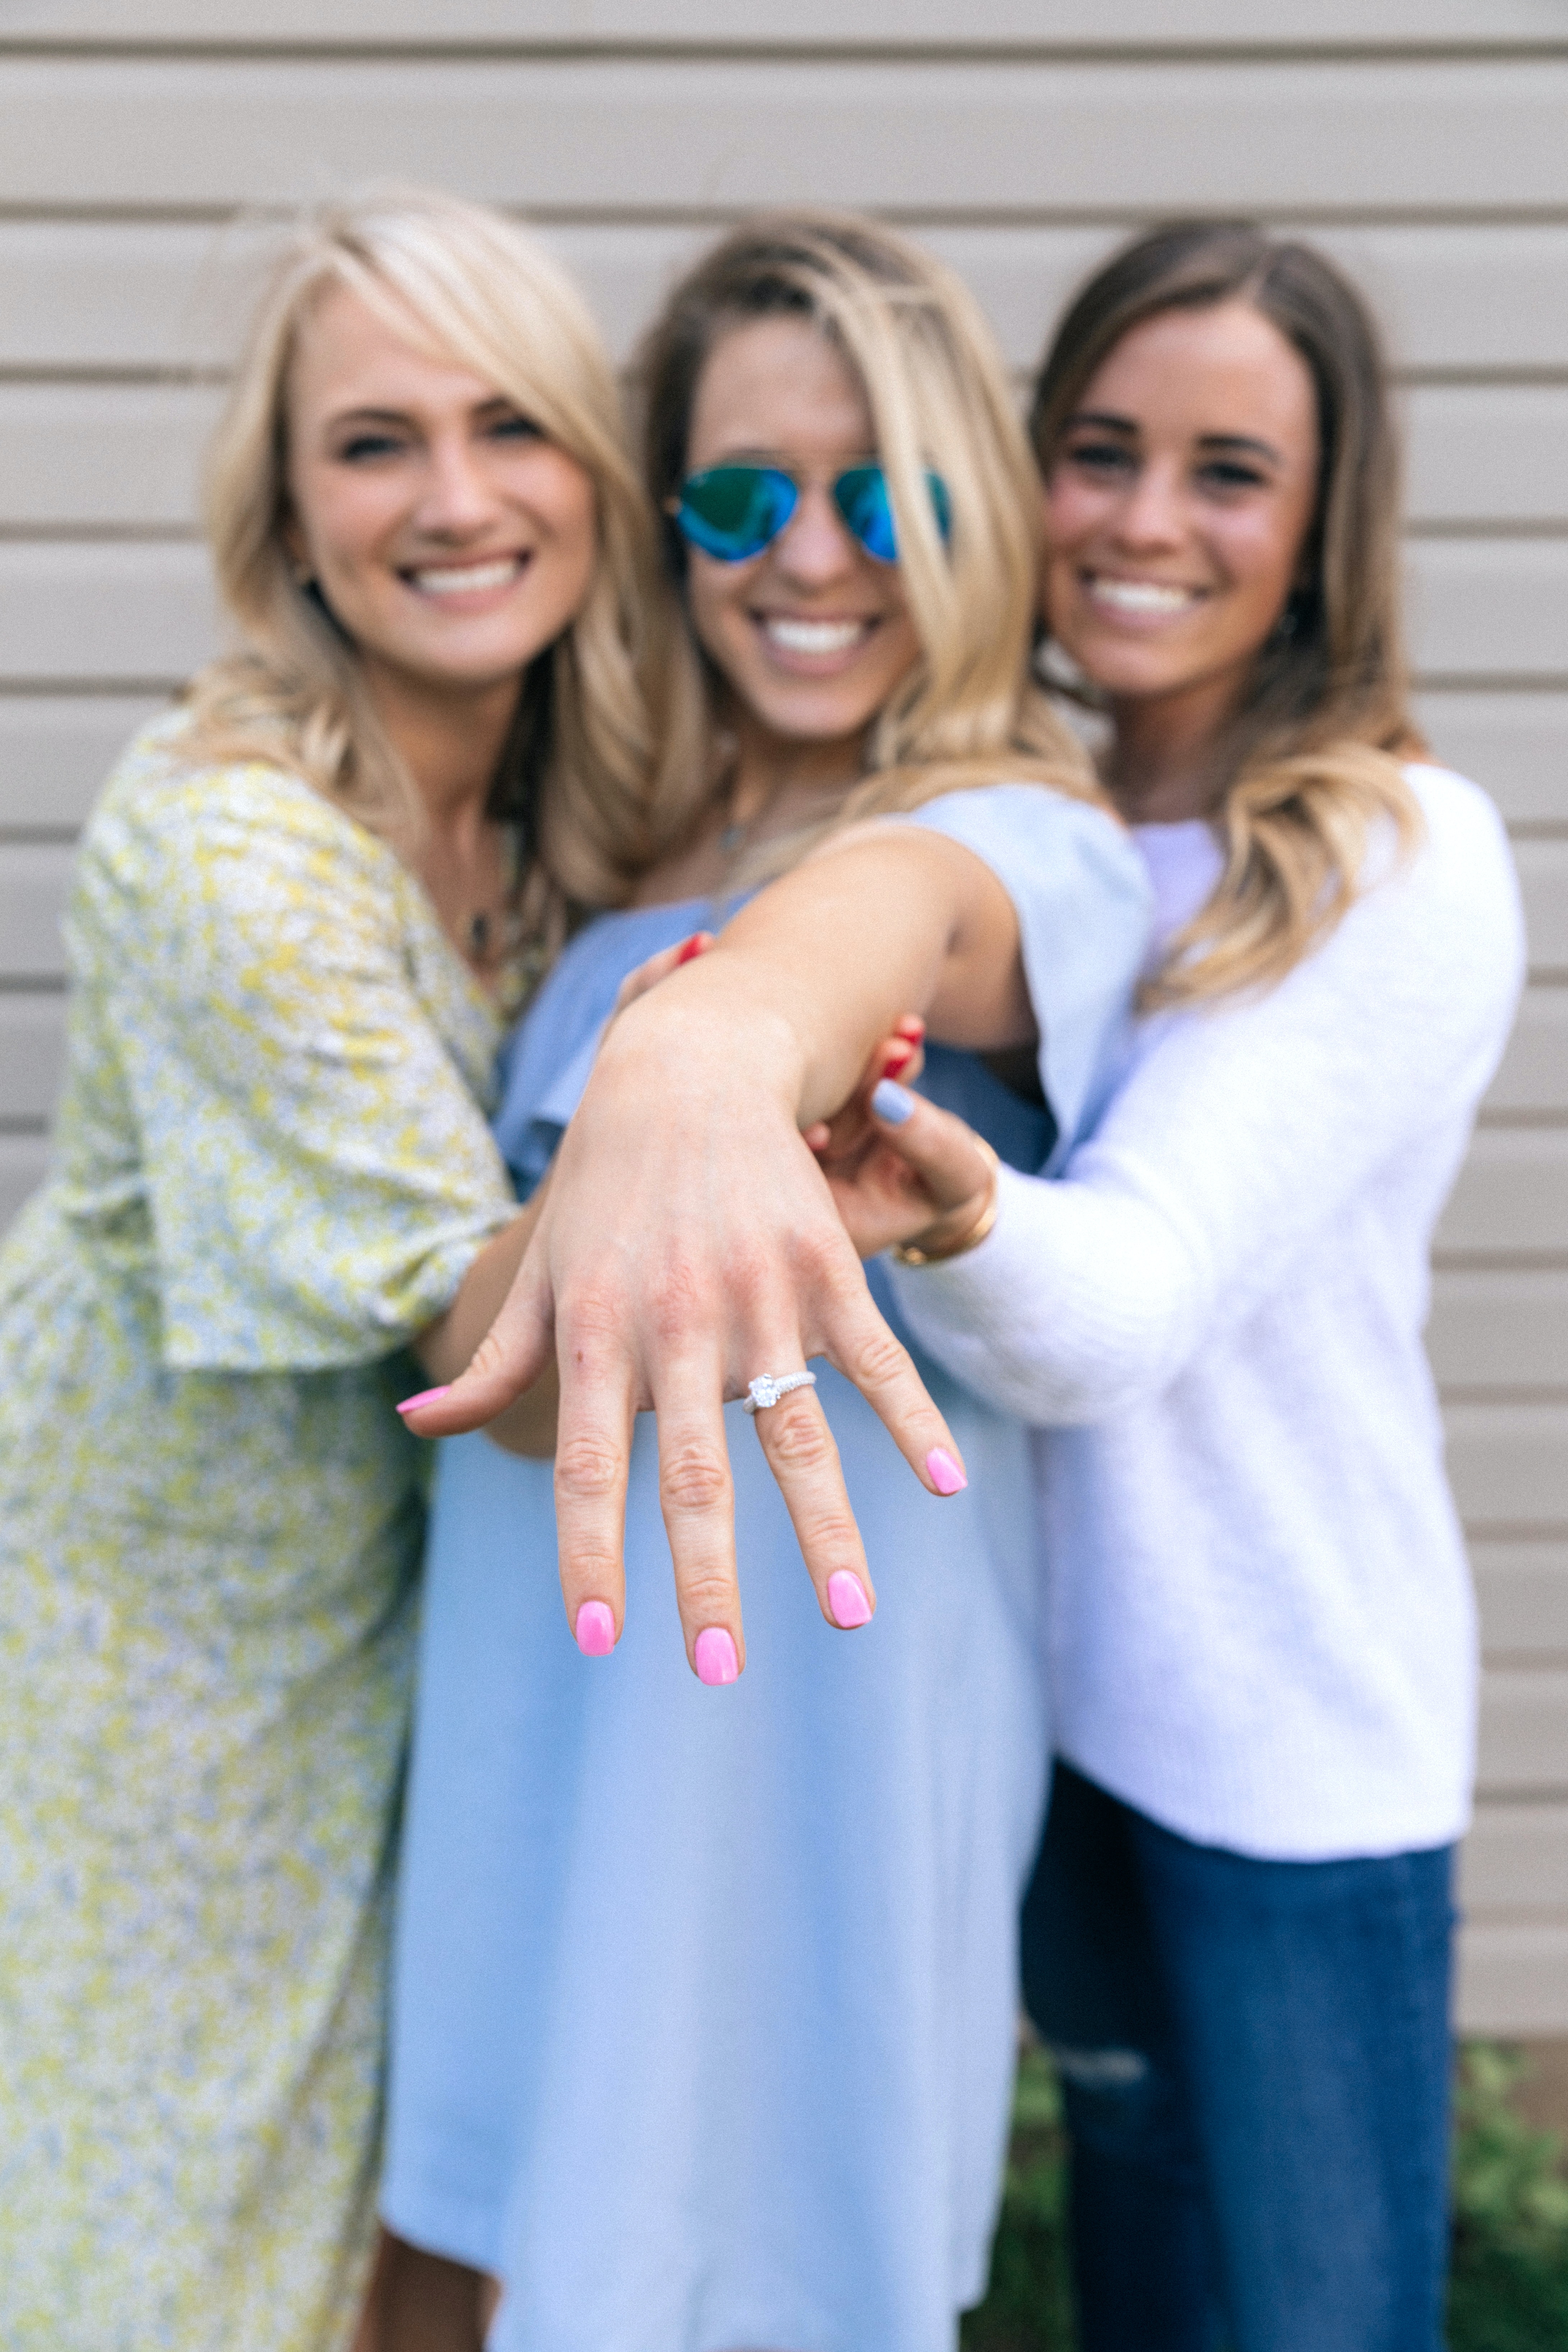 Three women stand together holding up one of their arms to display her engagement ring